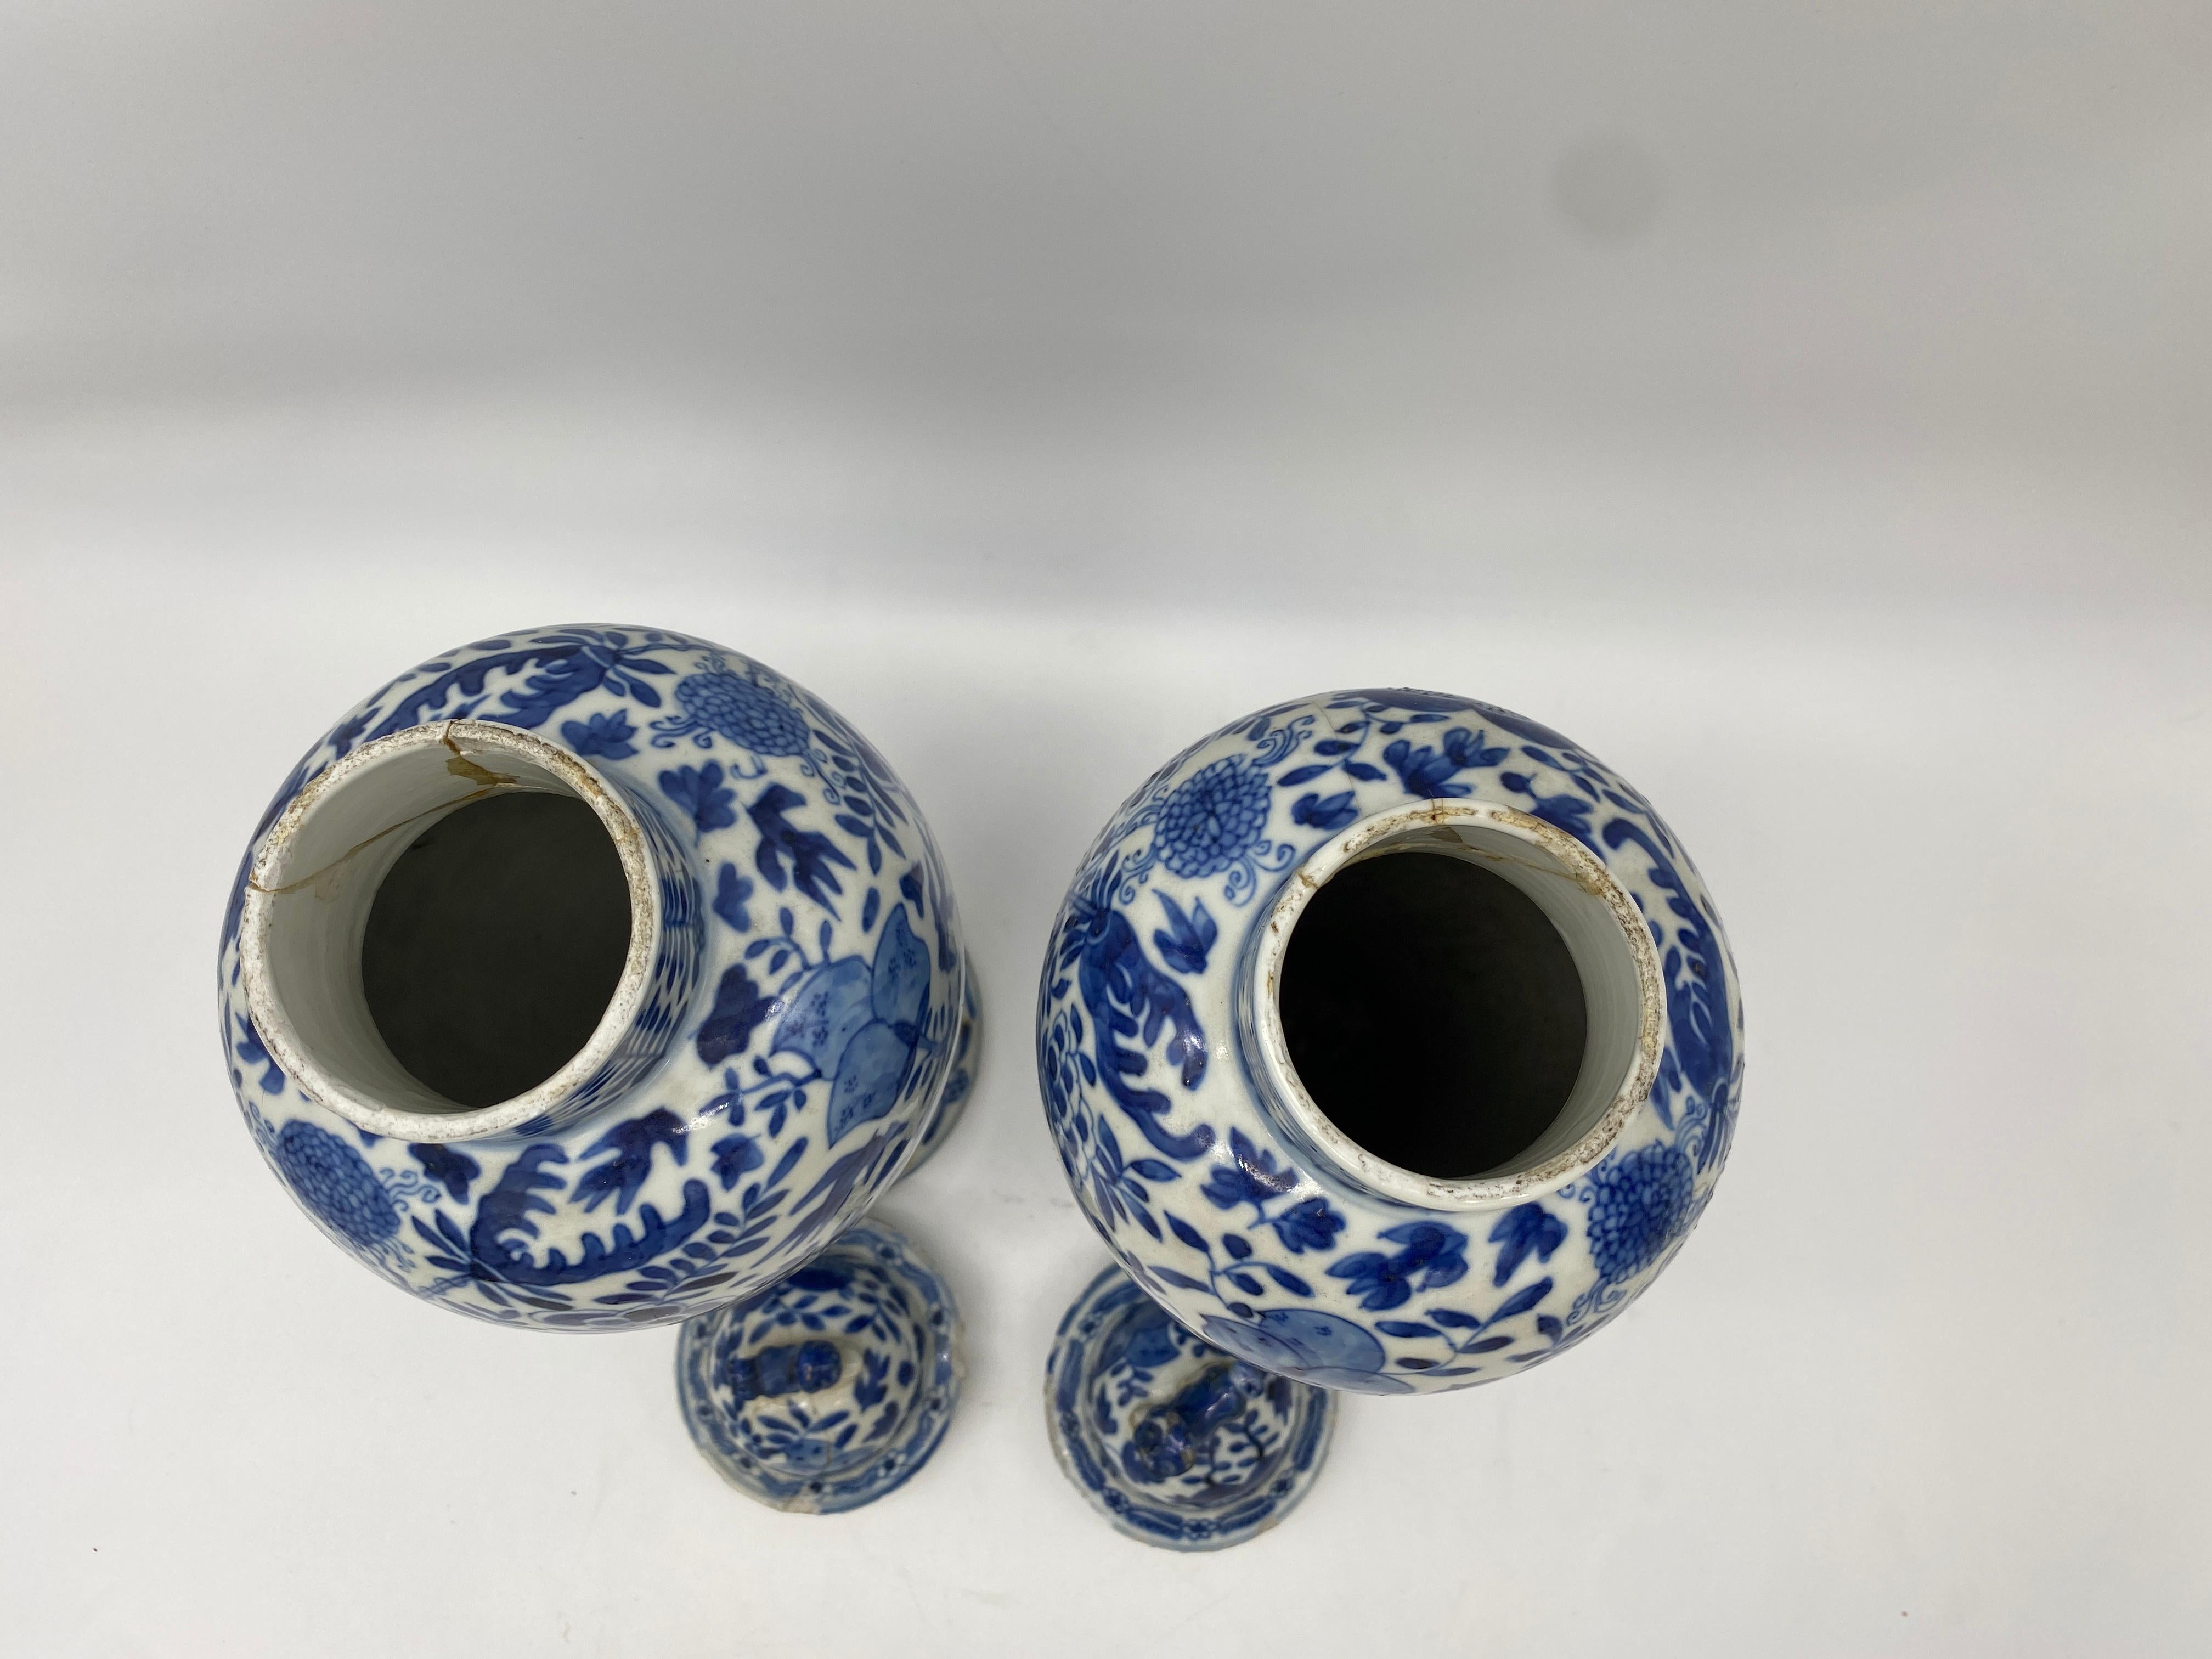 18th Century Antique Pair of Chinese Blue and White Porcelain Jars and Covers For Sale 11